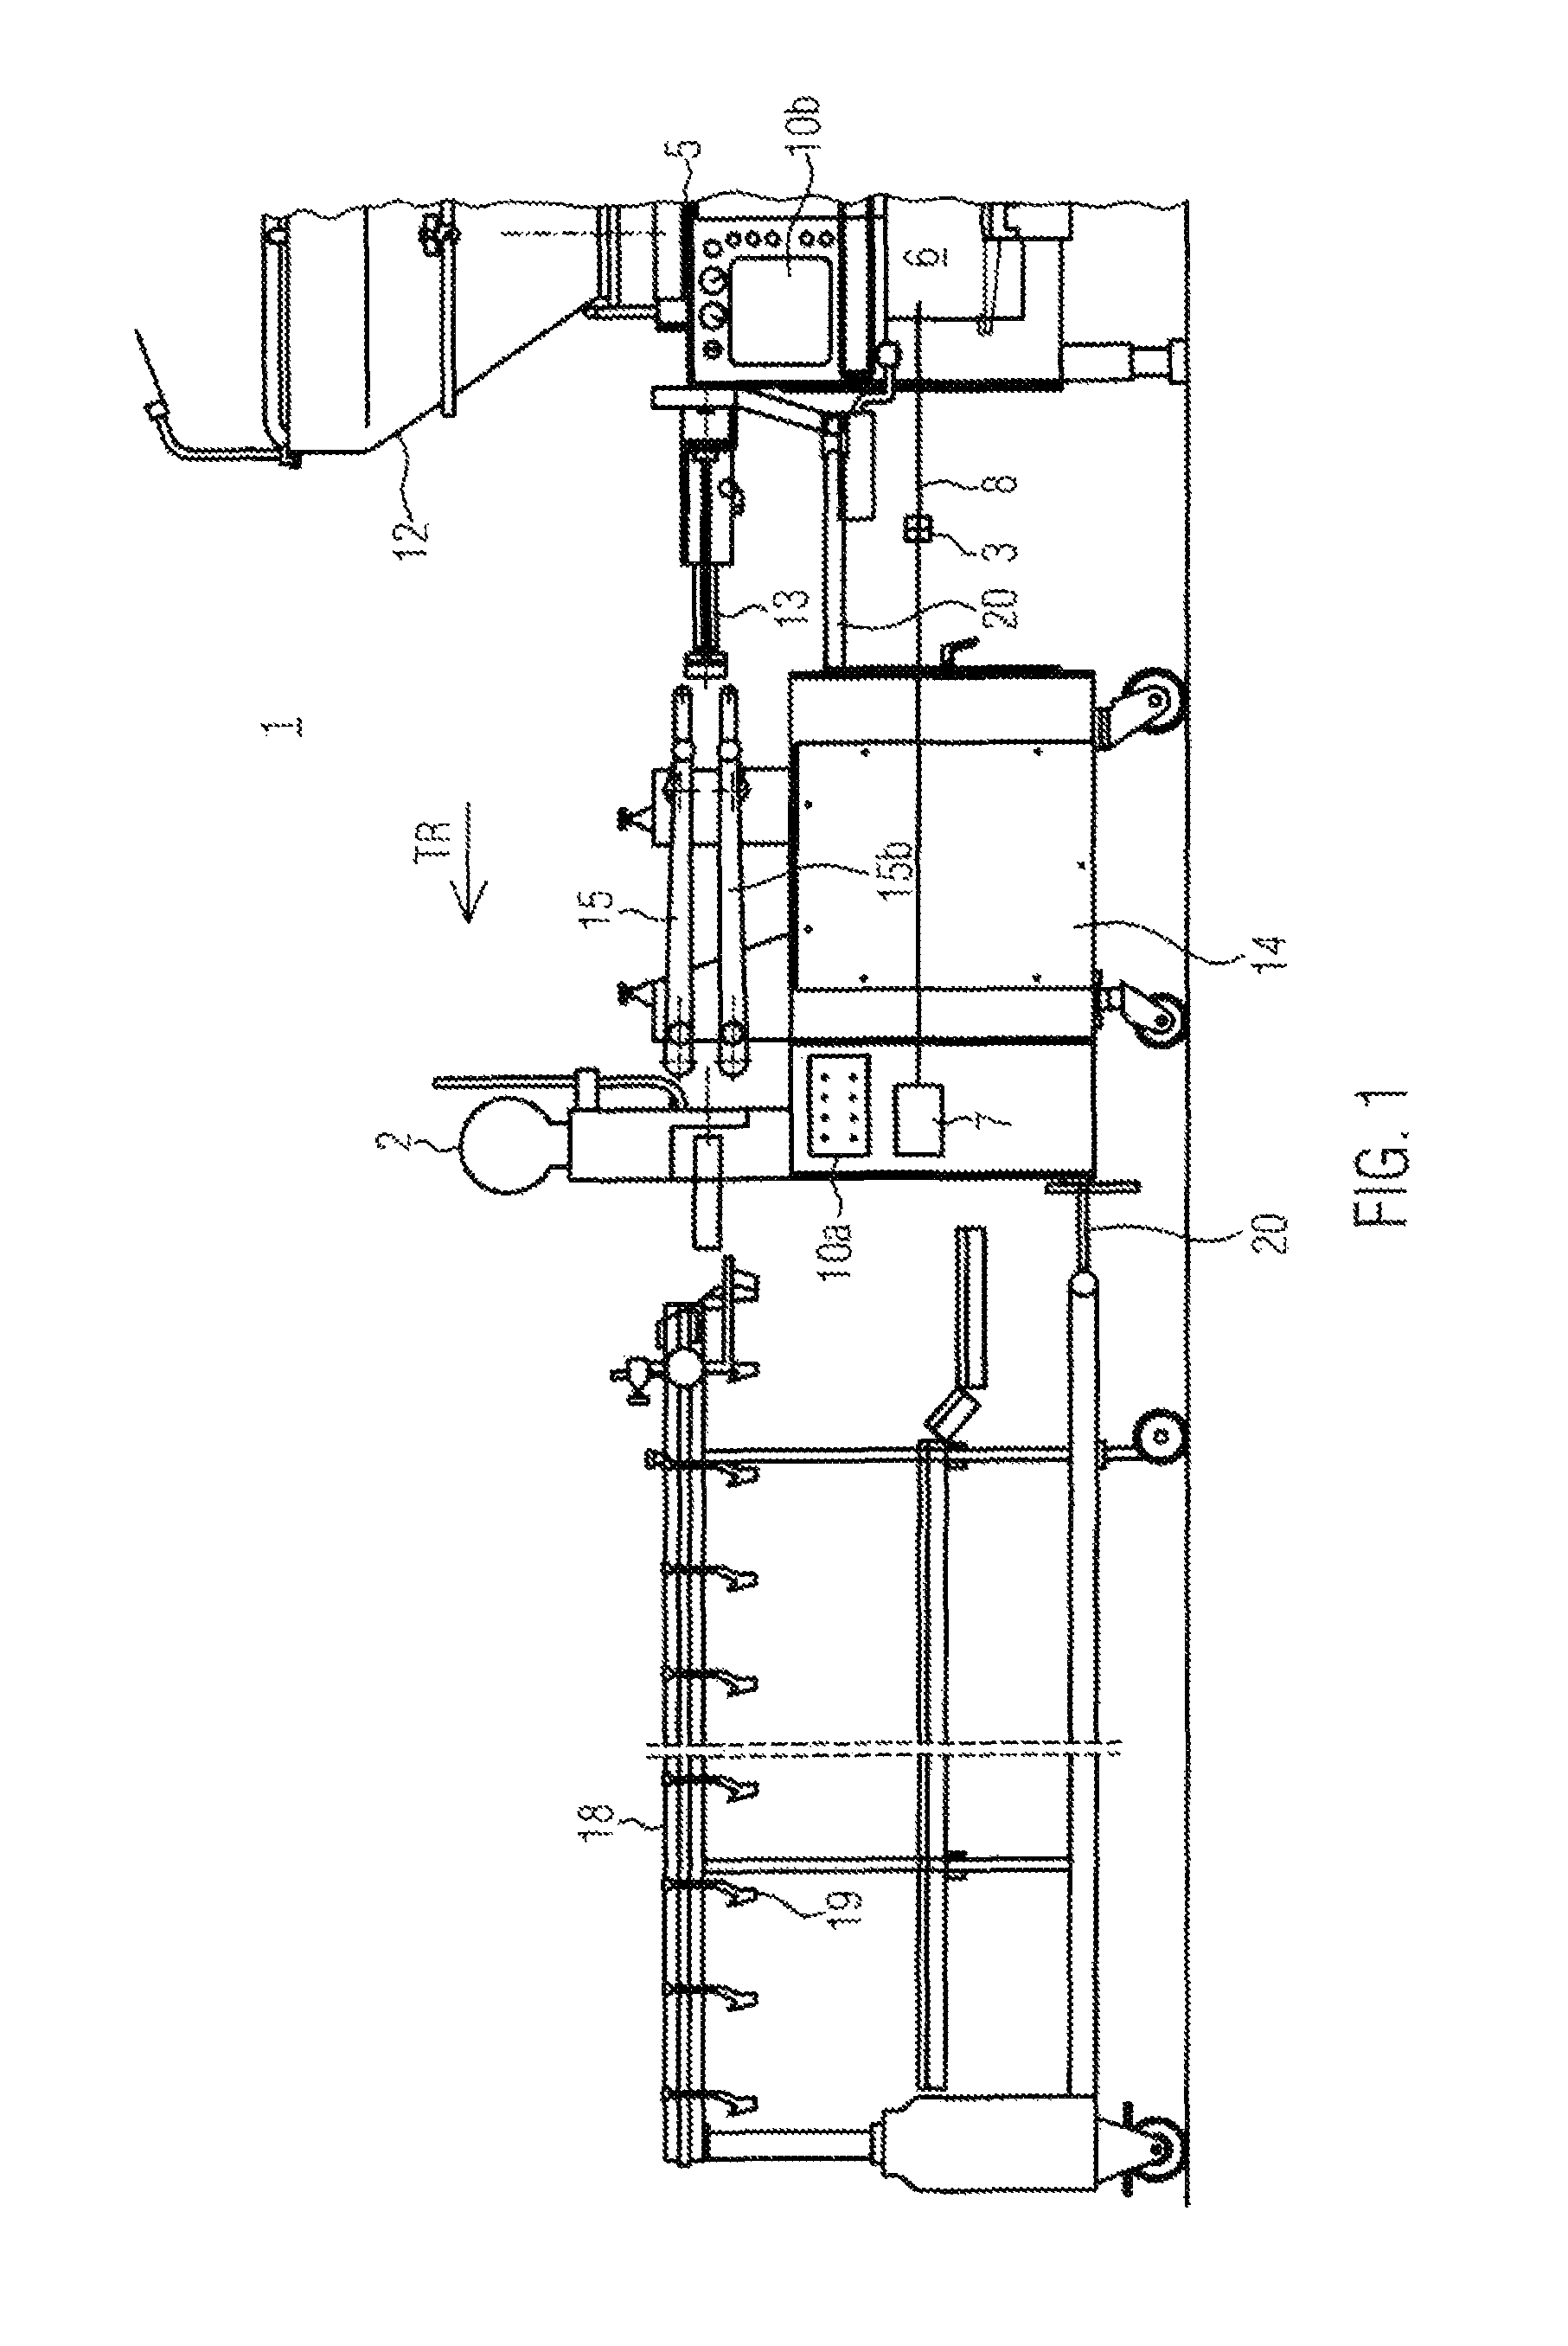 Device and method for controlling a filling machine